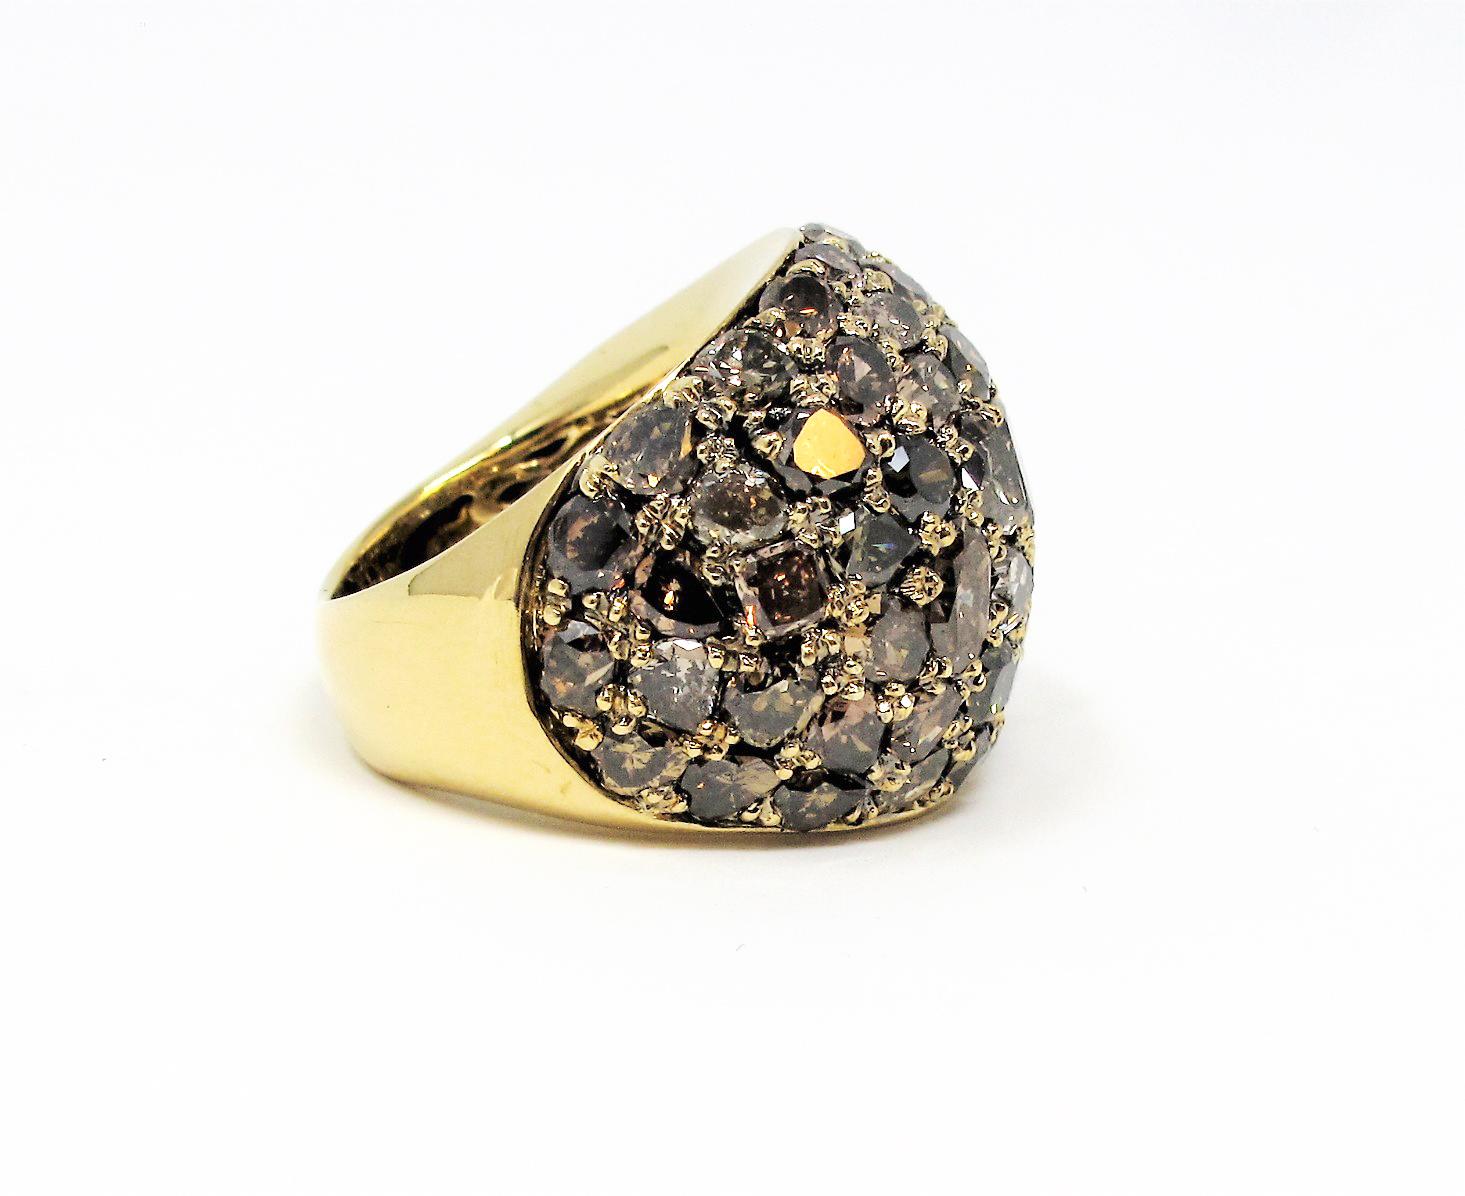 Contemporary Large Bombe Fancy Cognac Diamond Multi Cut Pave Dome Ring in 18 Karat Gold For Sale